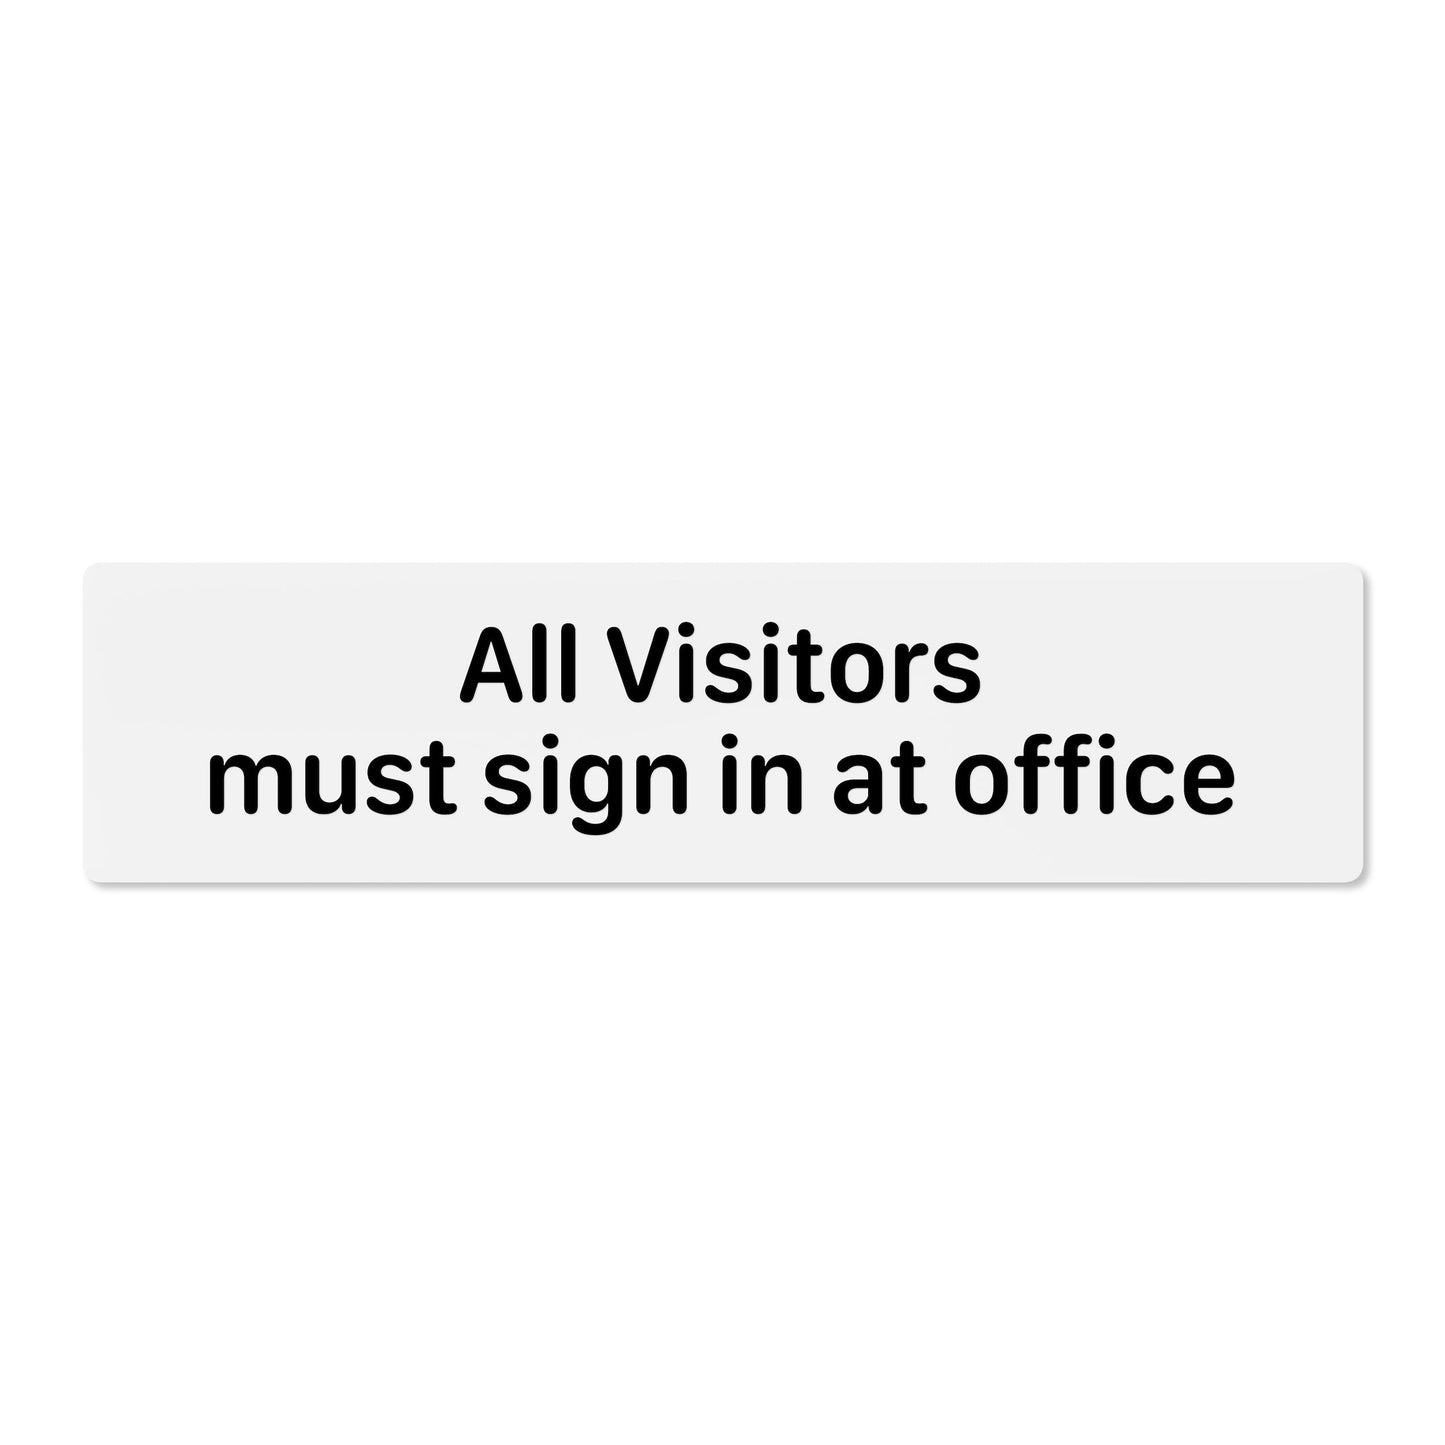 All visitors must sign in at office